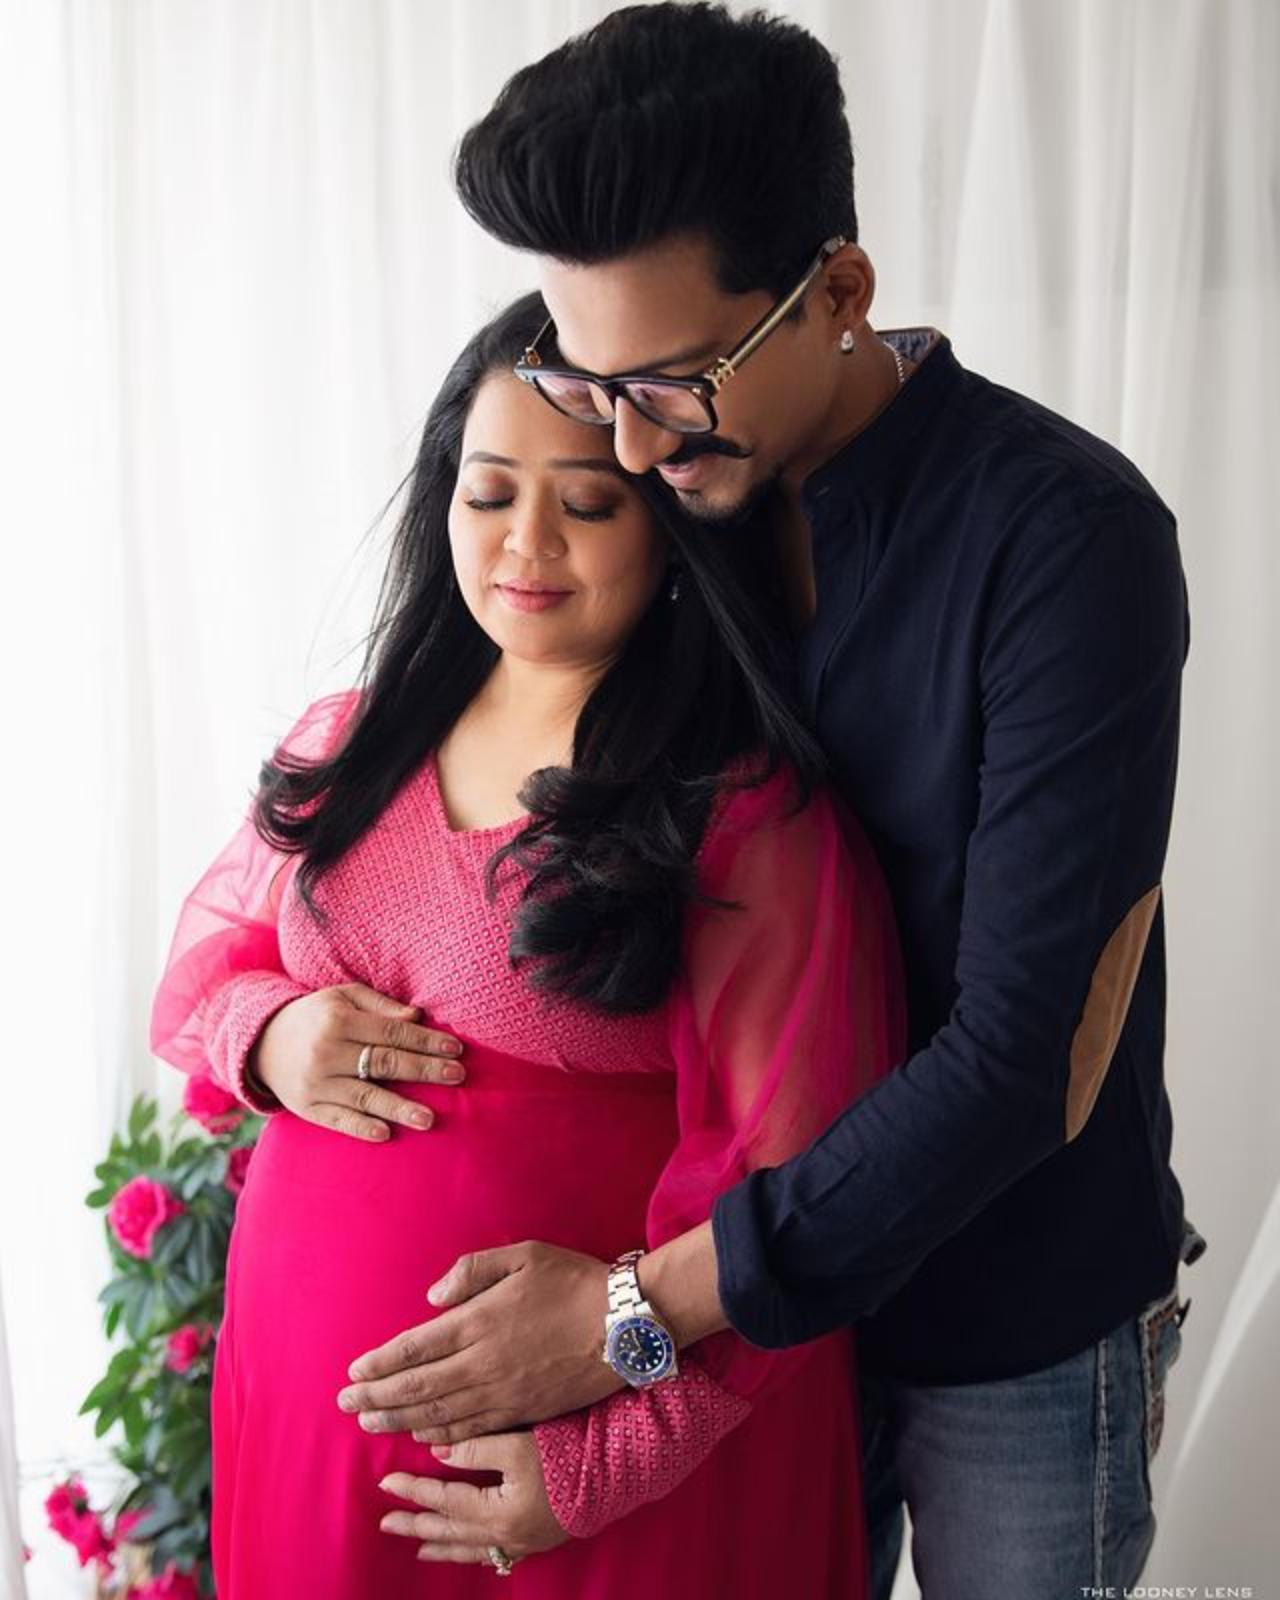 Popular comedian-host Bharti Singh welcomed her first child with Harch Limbachiya on April 3, 2022